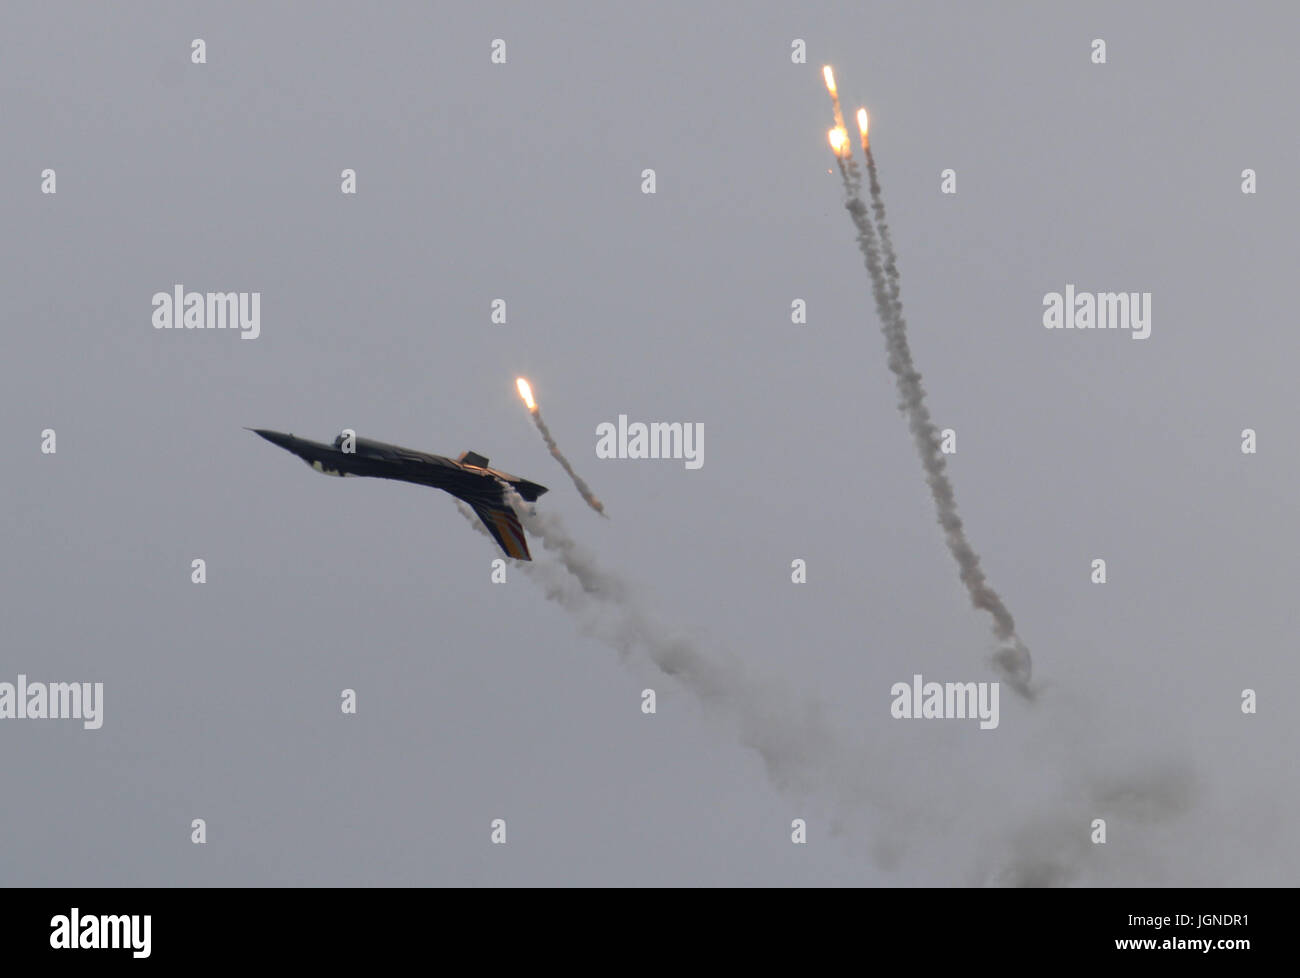 RNAS Yeovilton, Yeovilton, Somerset 8th July 2017 A Belgian Air Componrnt F-16 taking part in the Air Day releases flares from its countermeasures dispenser Credit: David Billinge/Alamy Live News Stock Photo